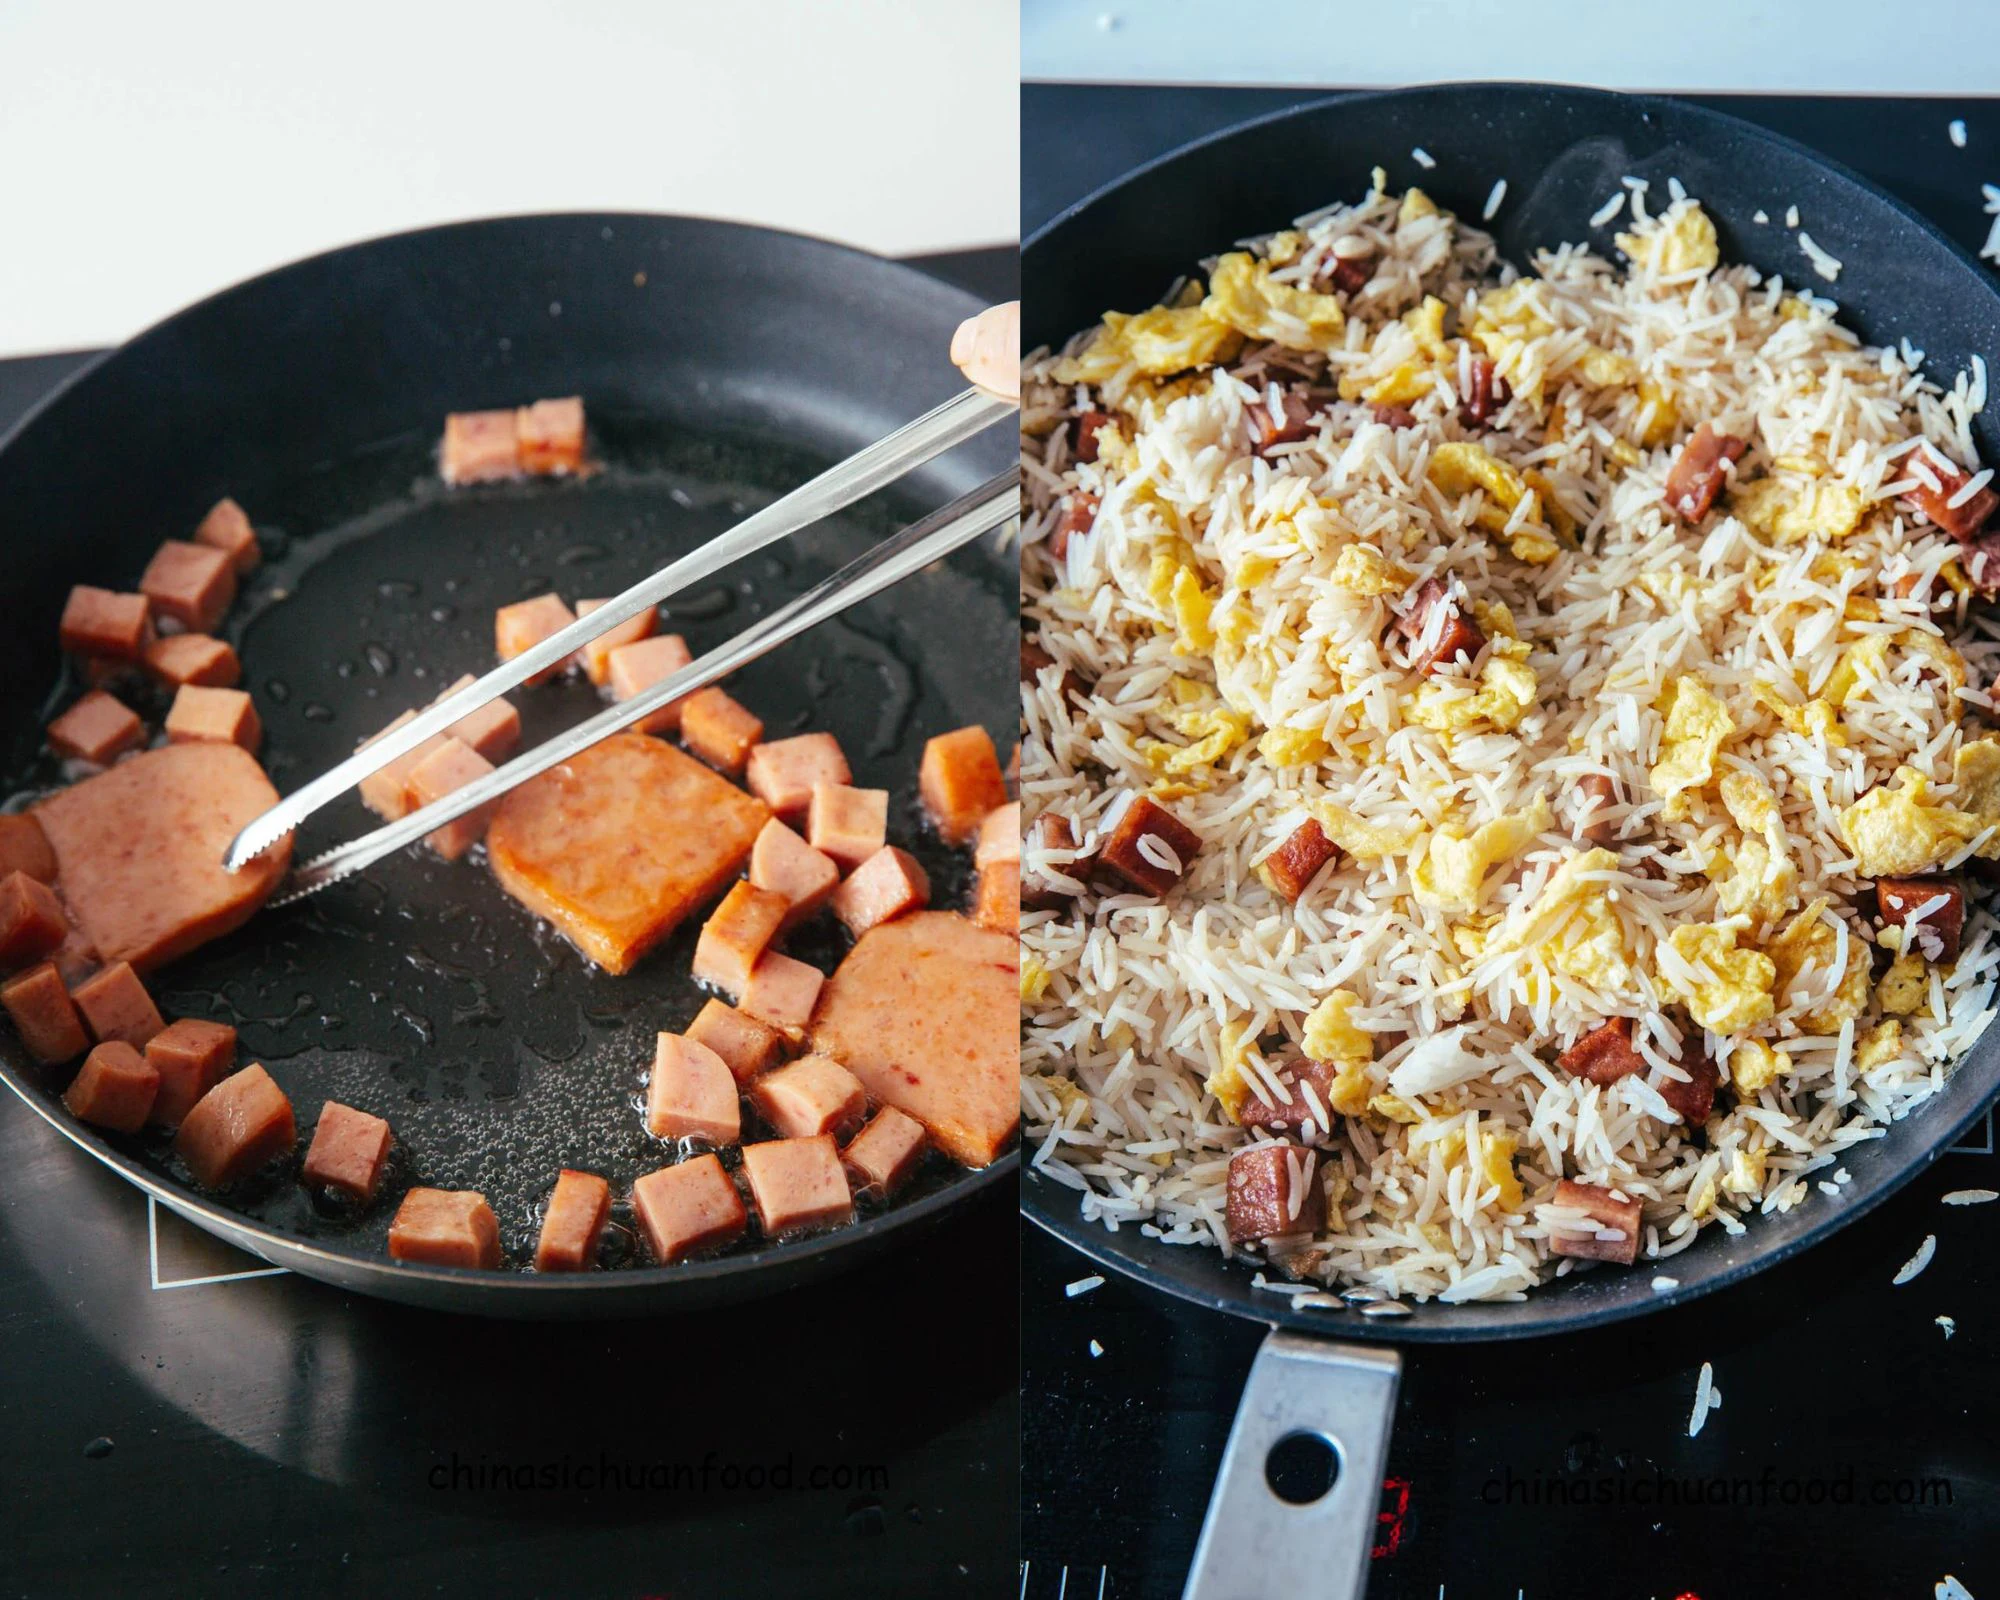 spam fried rice | chinasichuanfood.com